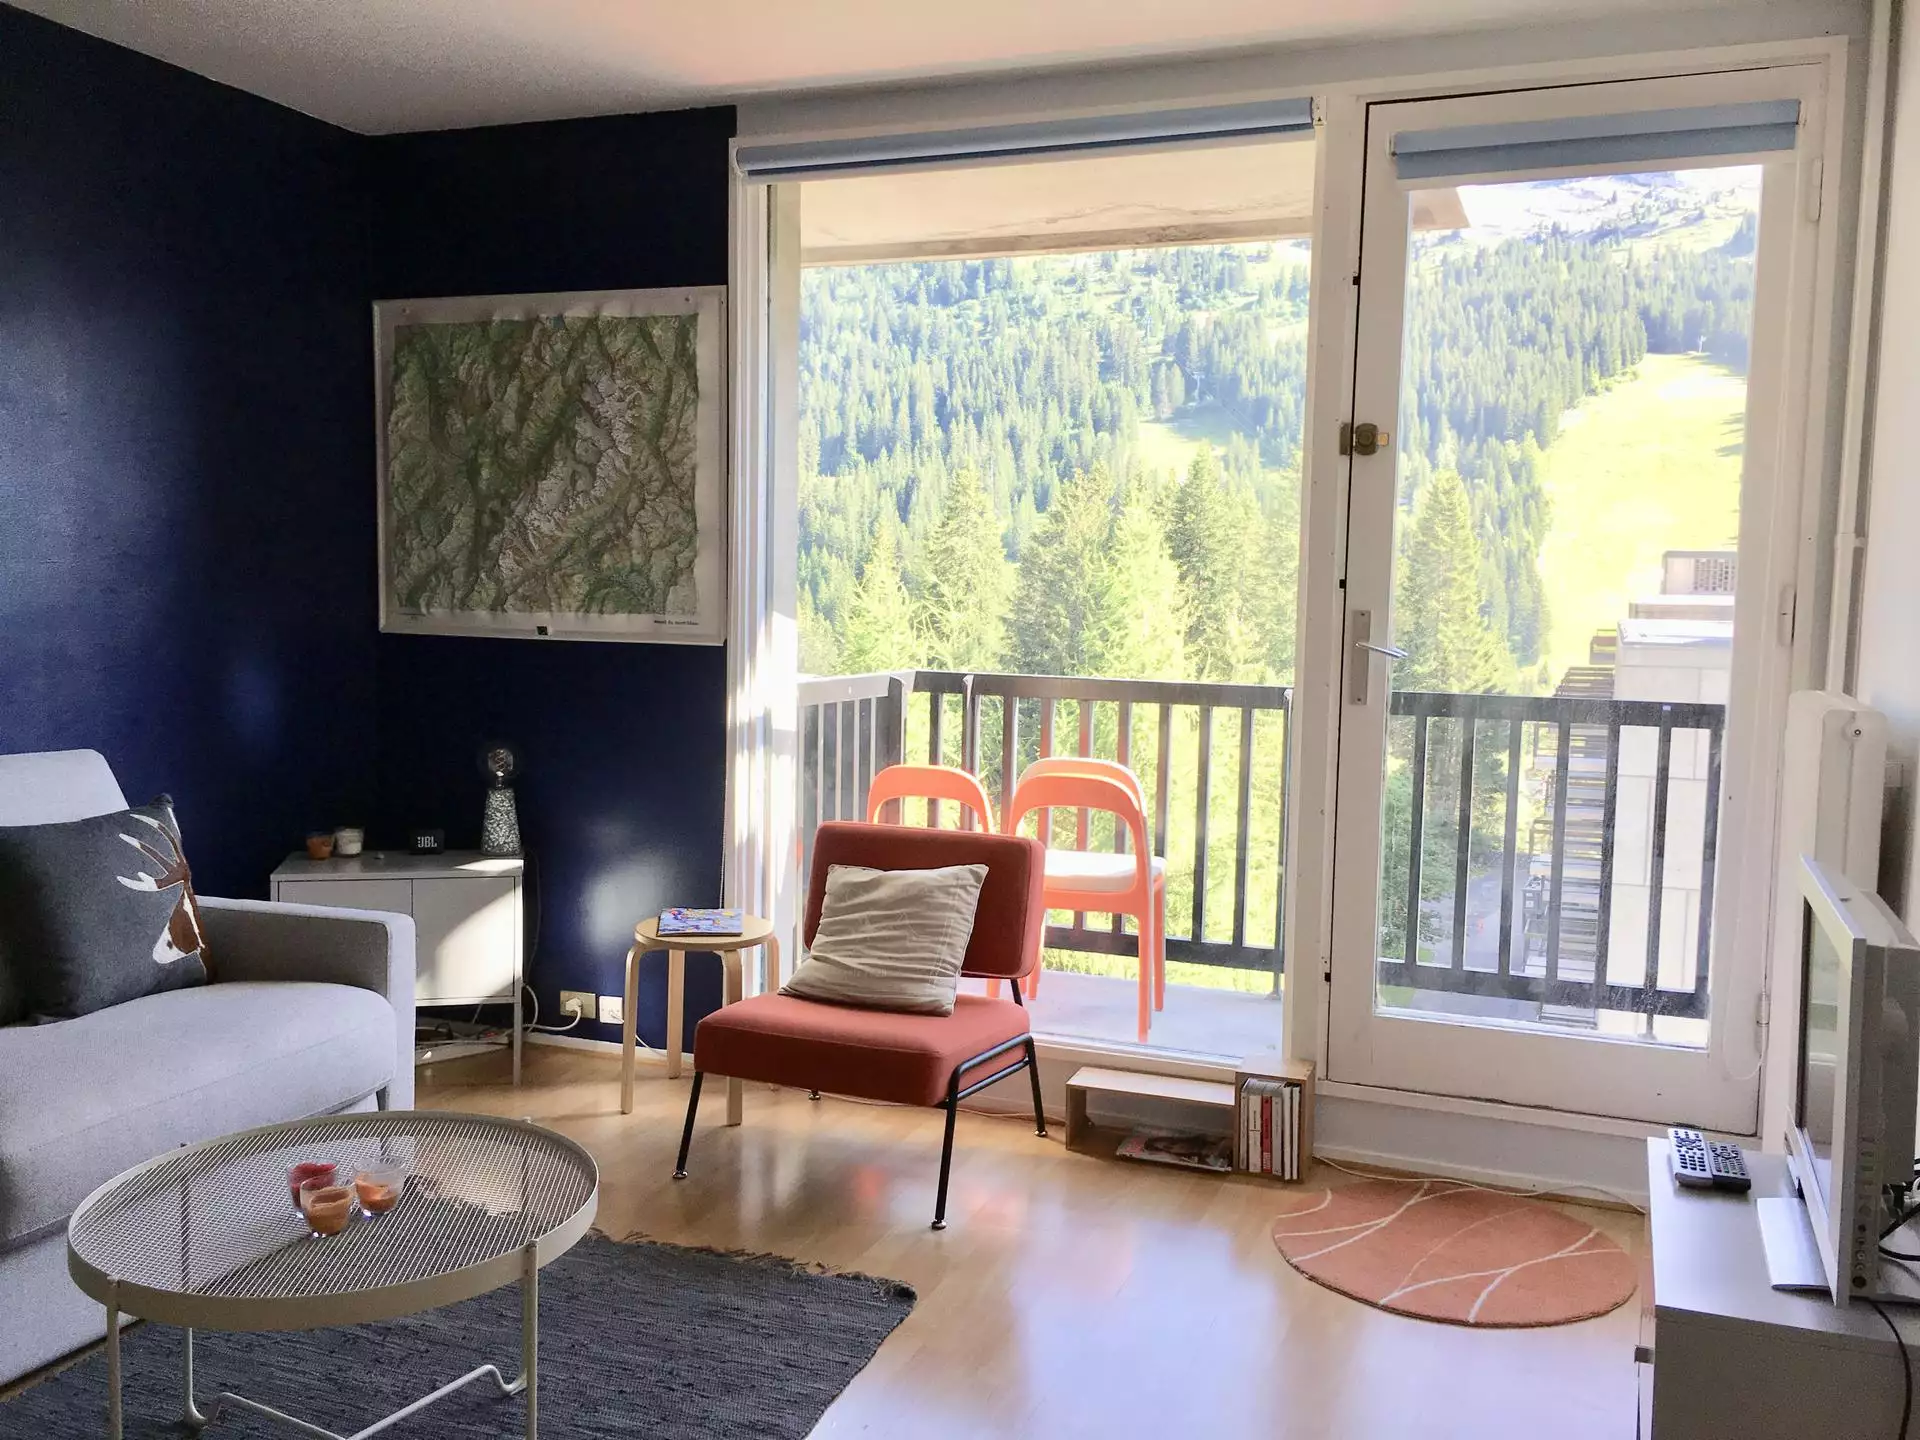 Renovated studio  Close to the slopes and shops  Balcony